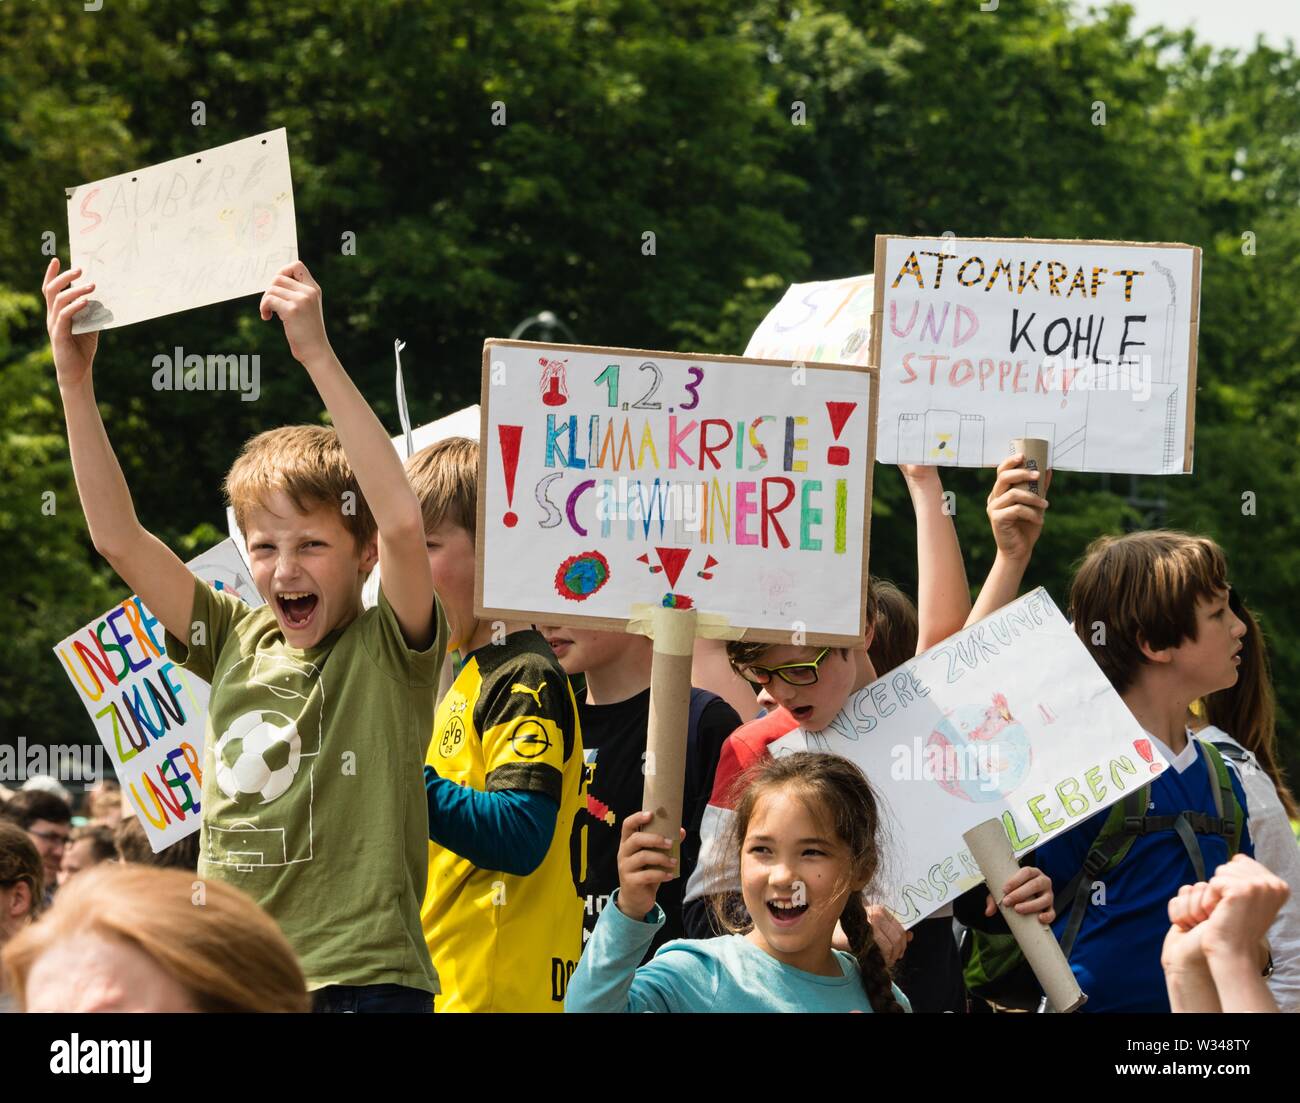 Fridays for Future, demonstration of pupils with signs against climate change on 24 May 2019, climate protection, global warming, coal withdrawal Stock Photo